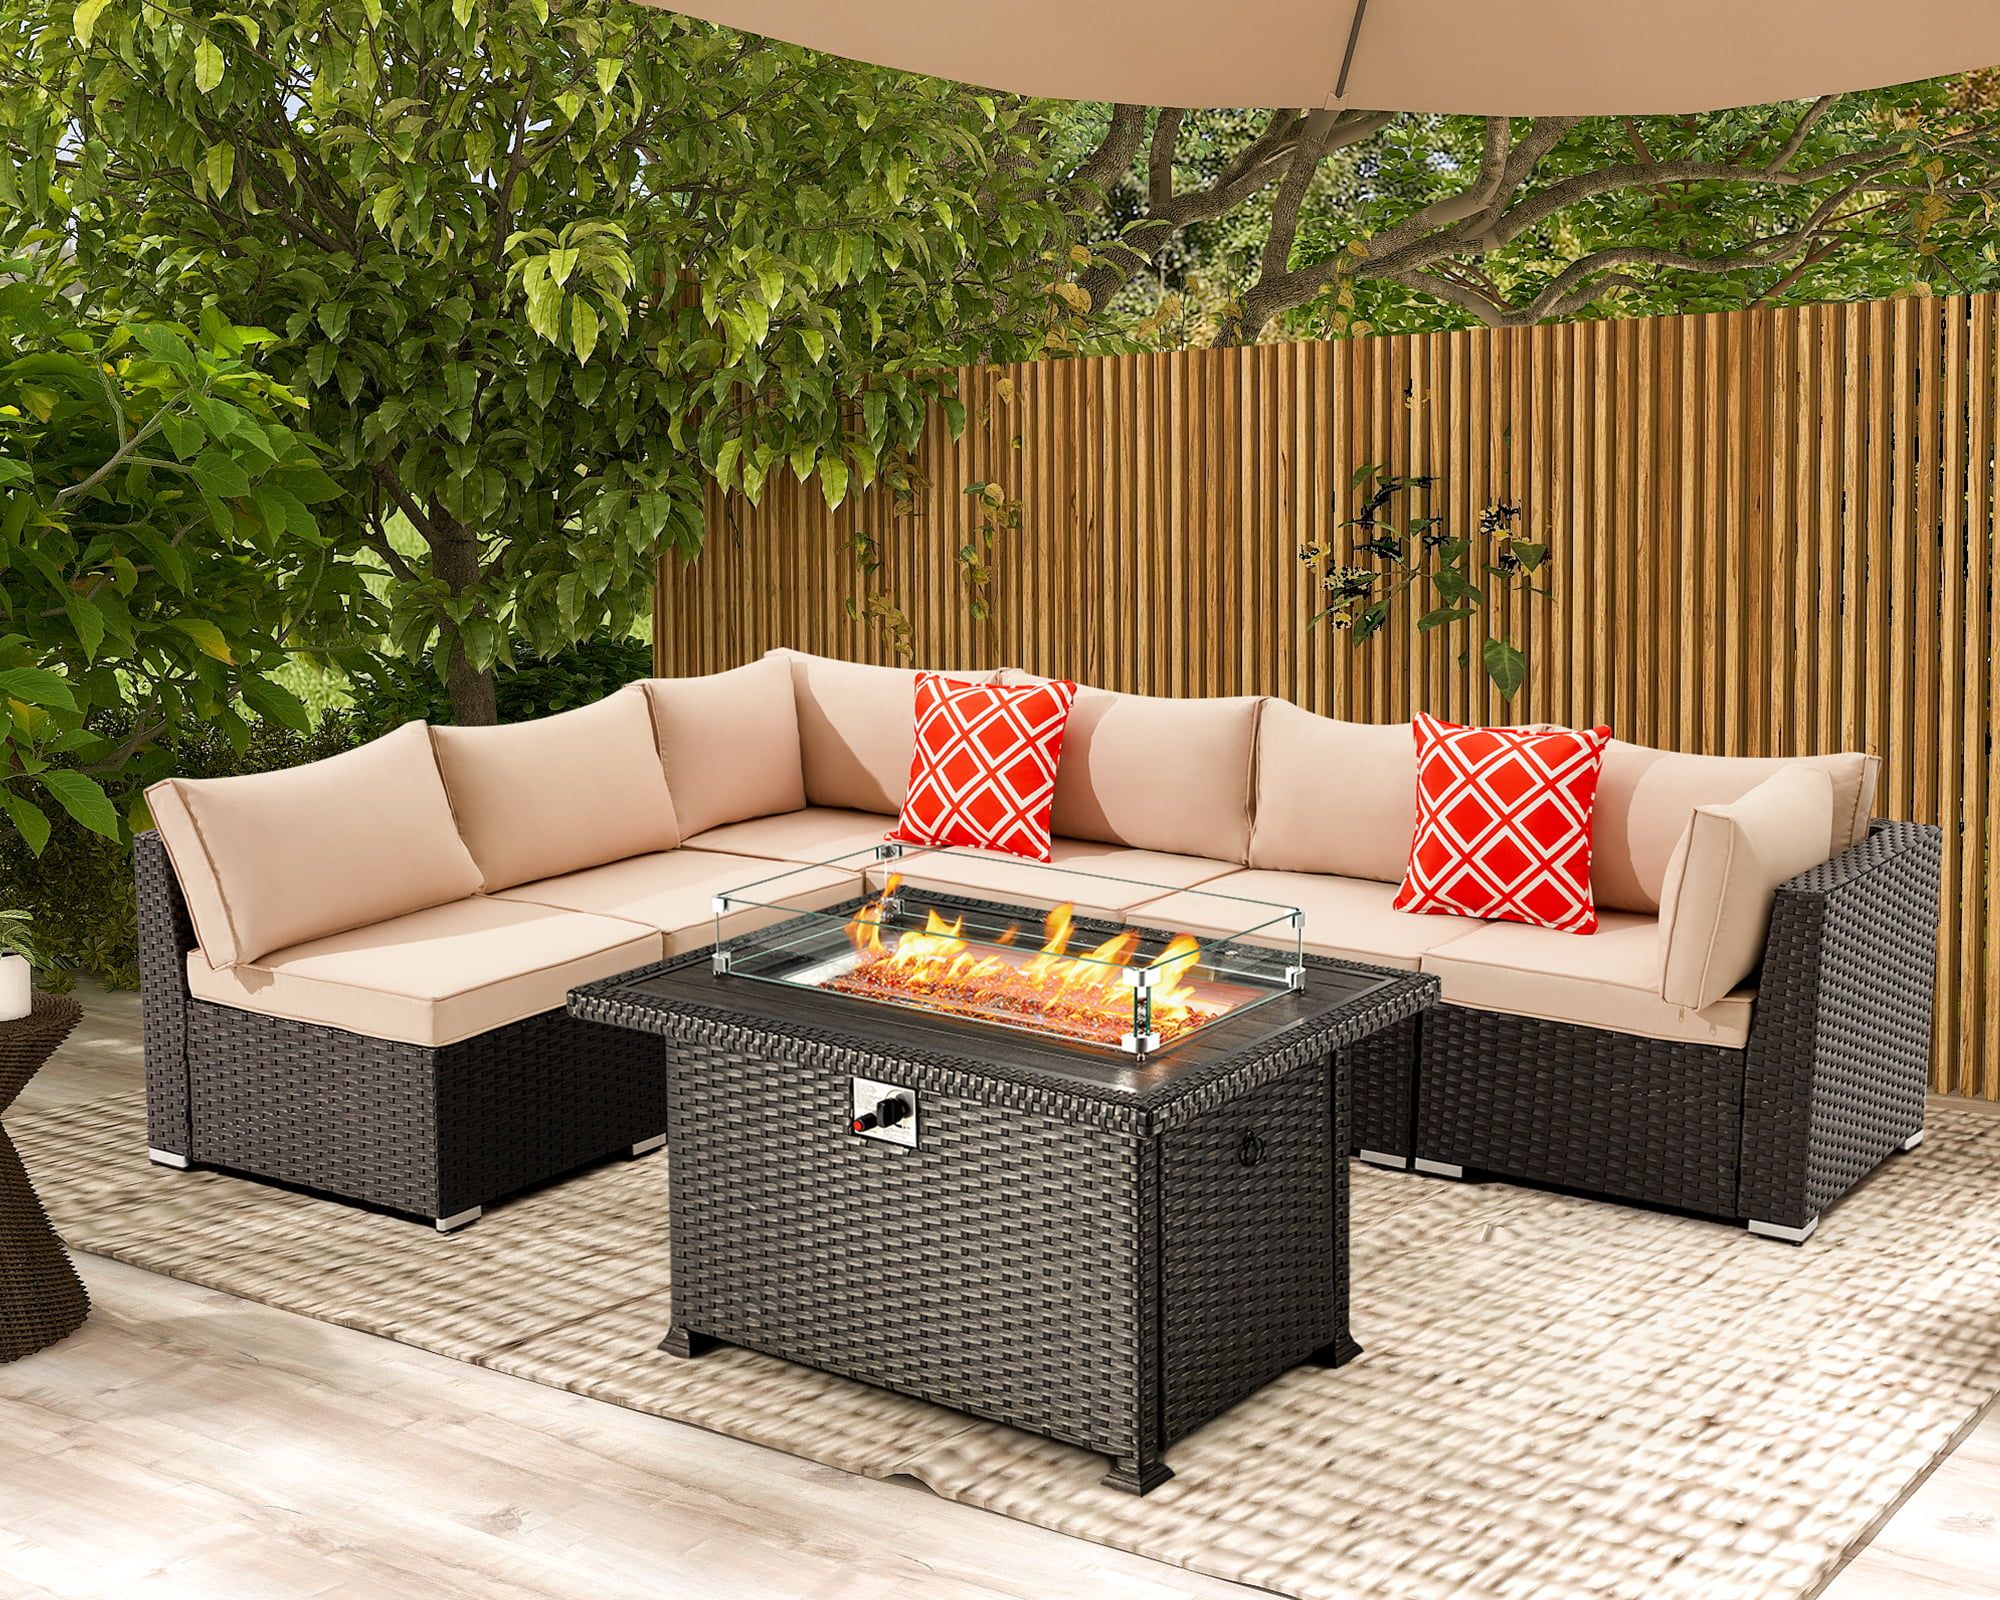 Hugiee 7 Pieces Patio Furniture Wicker Sofa Outdoor Sectional Sets With  44 Inch 50,000 Btu Gas Fire Pit Table Auto Ignition Propane Fire Pit Table,  Khaki – Walmart Pertaining To Fire Pit Table Wicker Sectional Sofa Conversation Set (Photo 3 of 15)